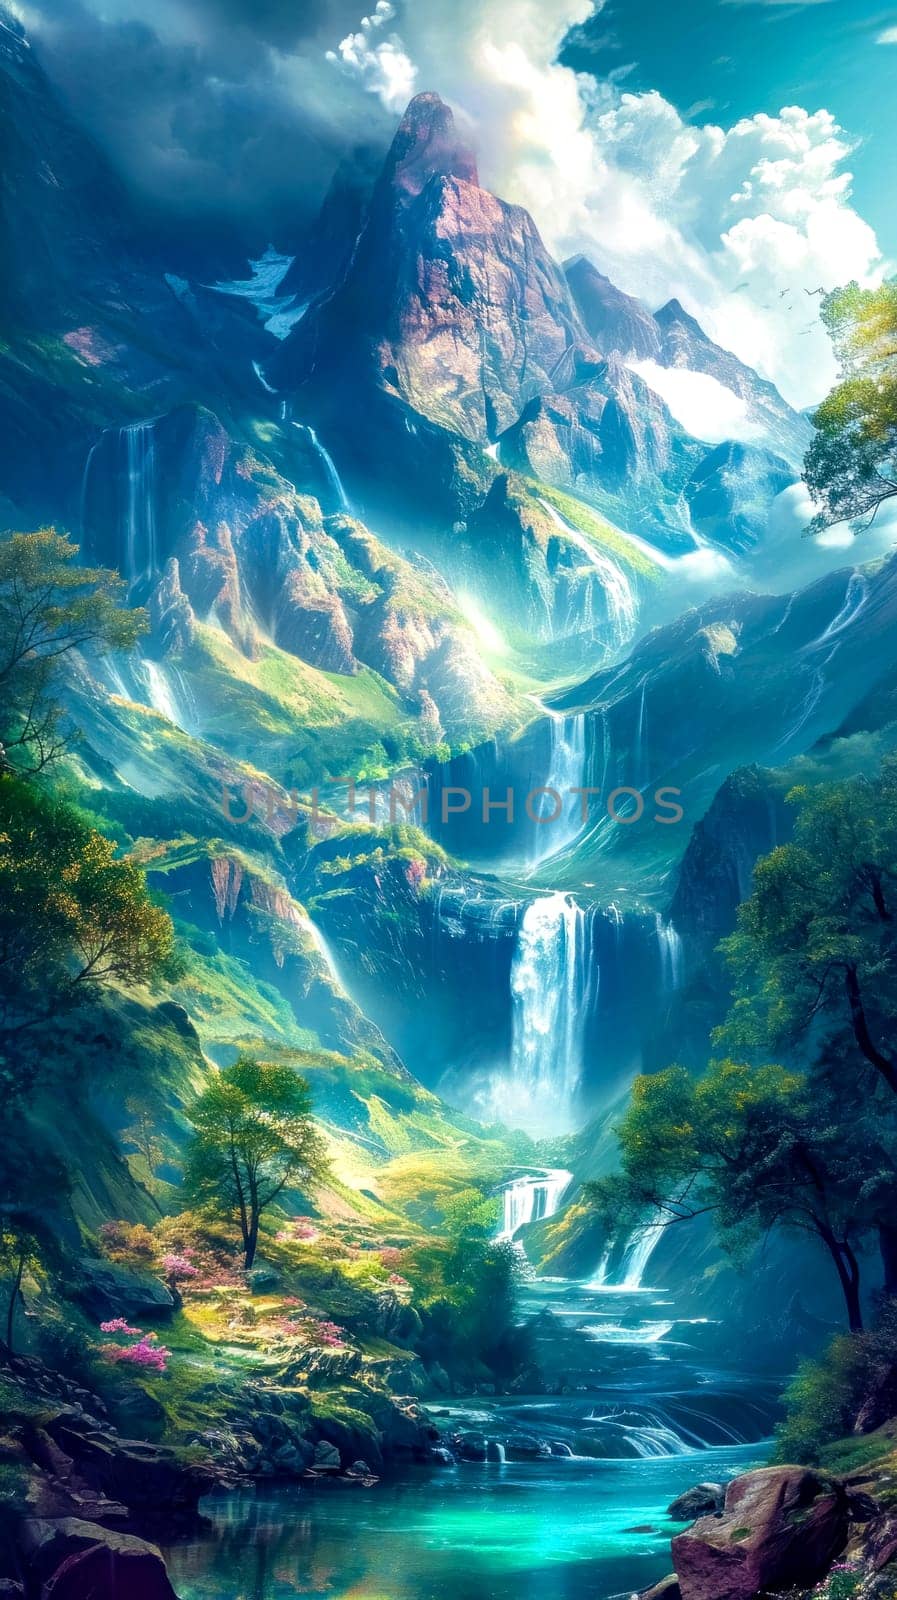 breathtaking fantasy landscape, showcasing a vibrant river with multiple waterfalls cascading down majestic mountains, surrounded by lush greenery and flowering trees, all under a serene sky by Edophoto